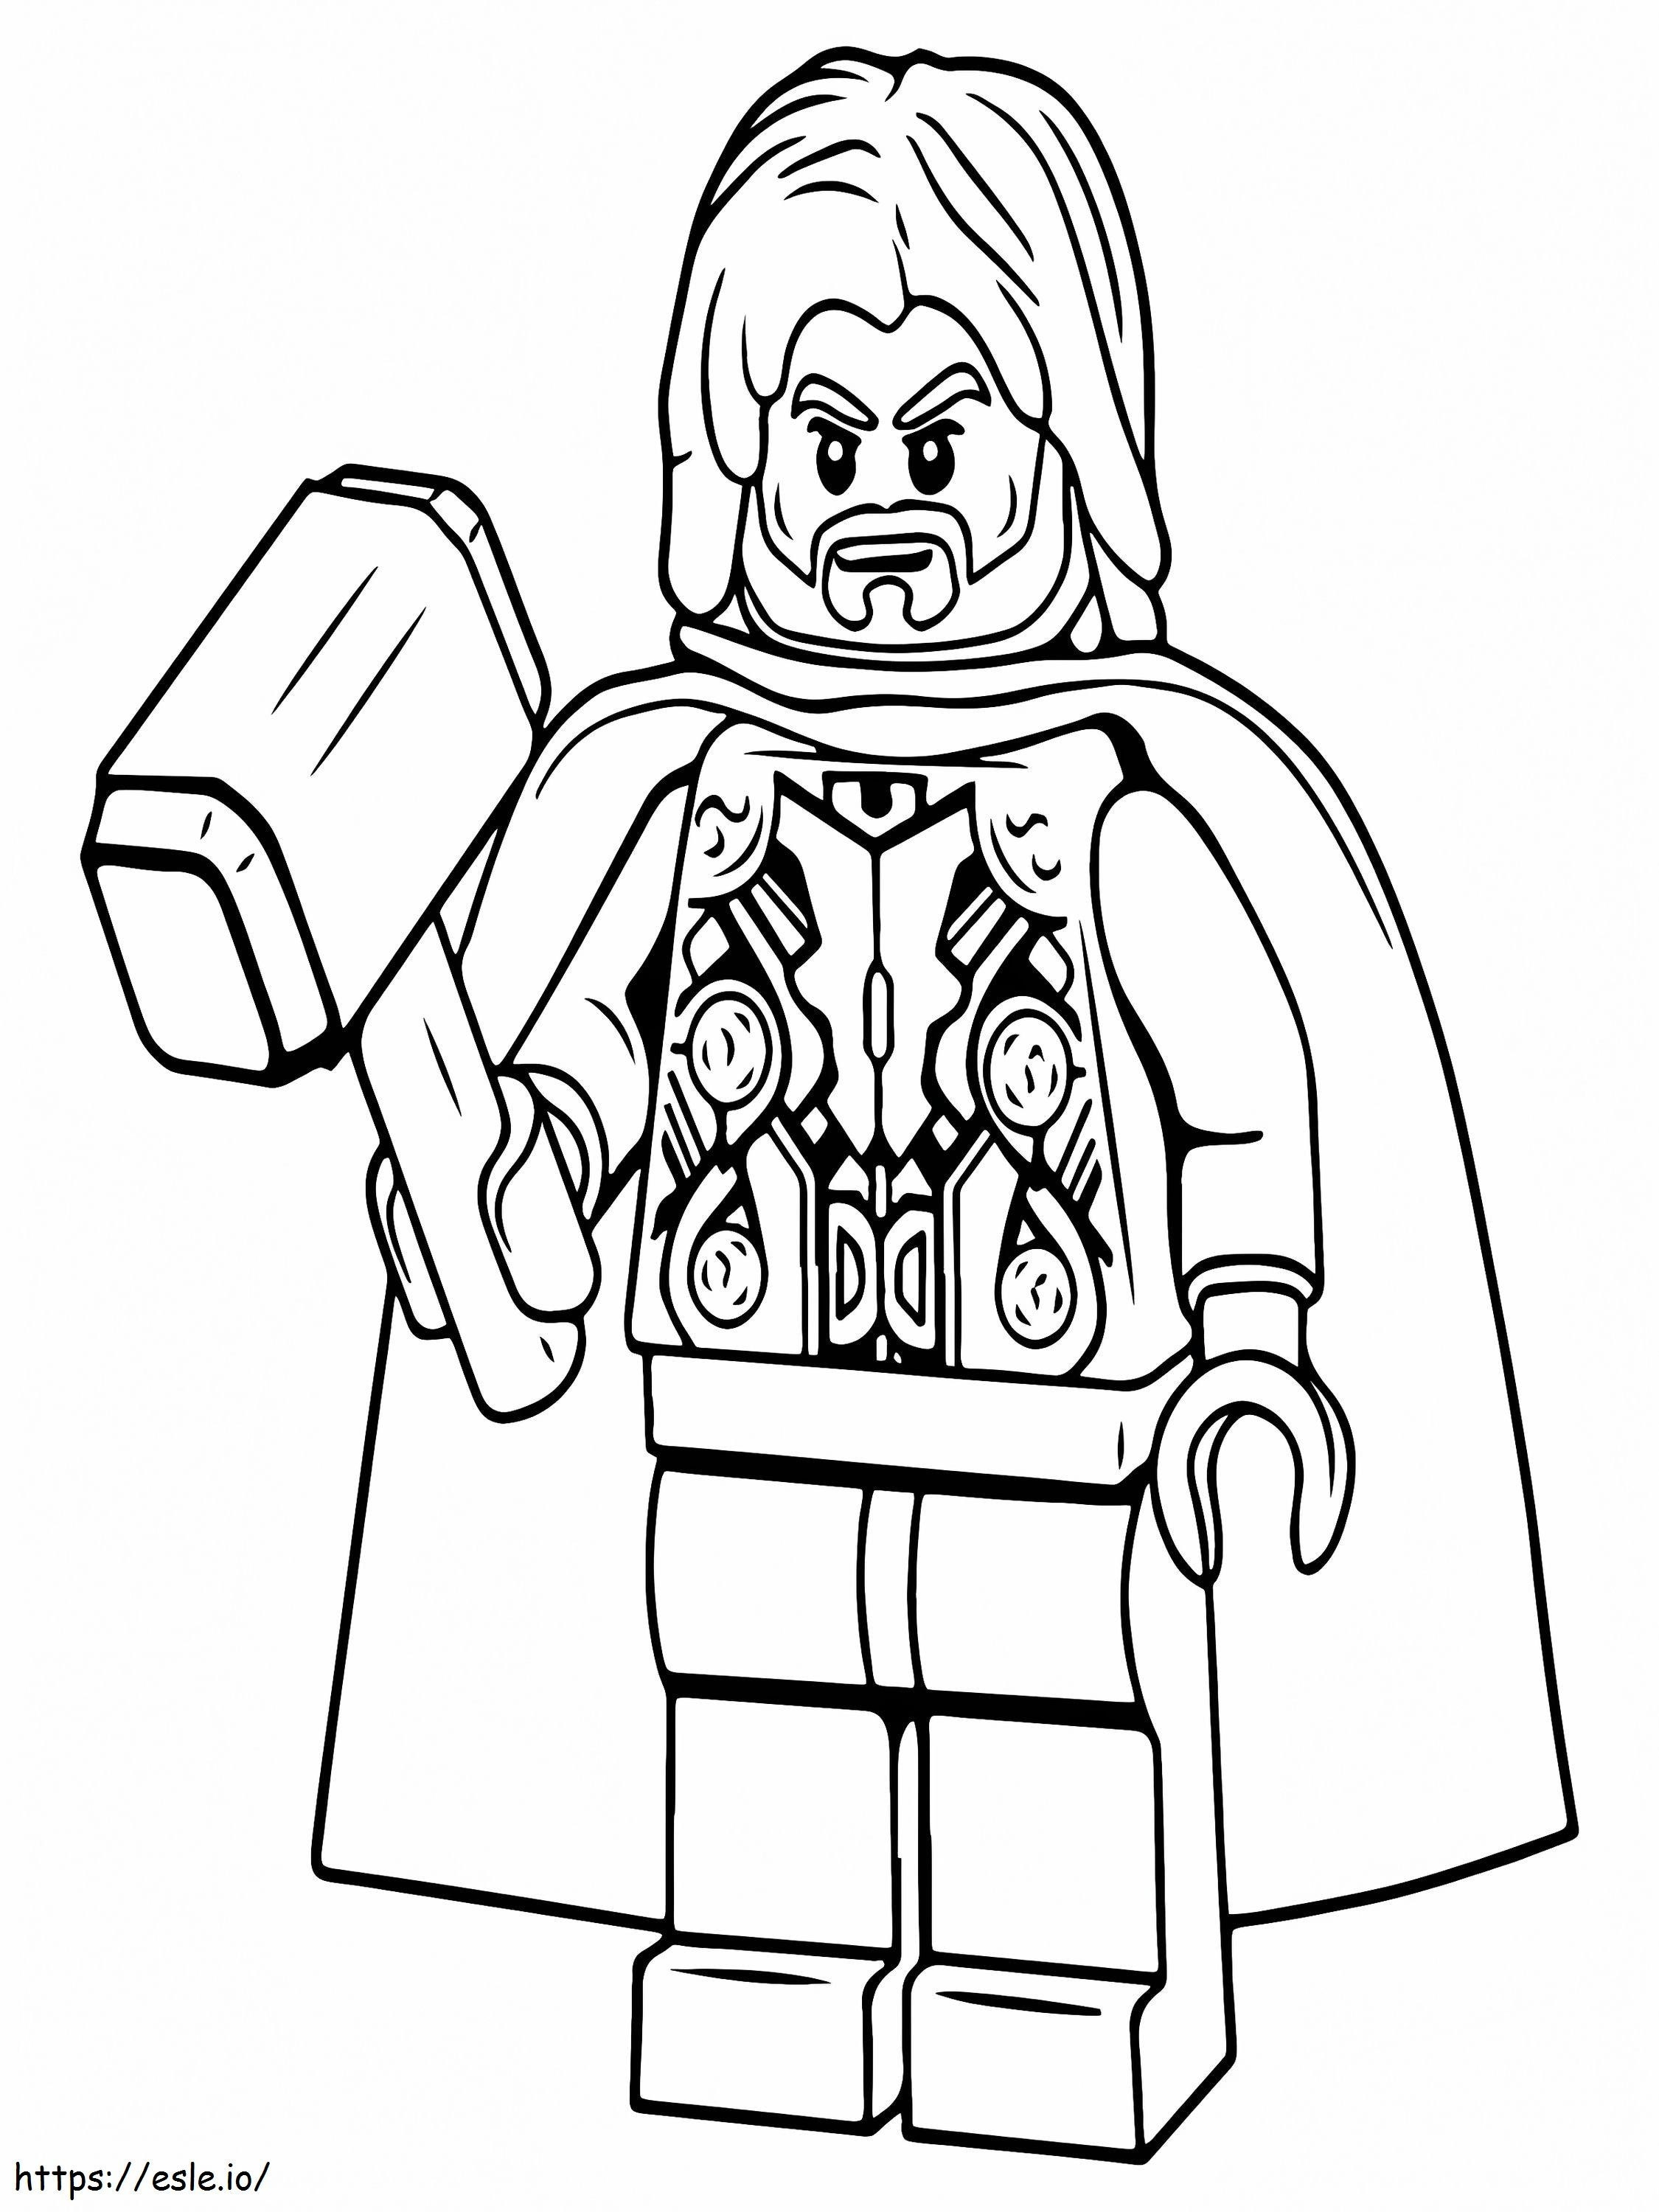 Thor Lego Avengers coloring page